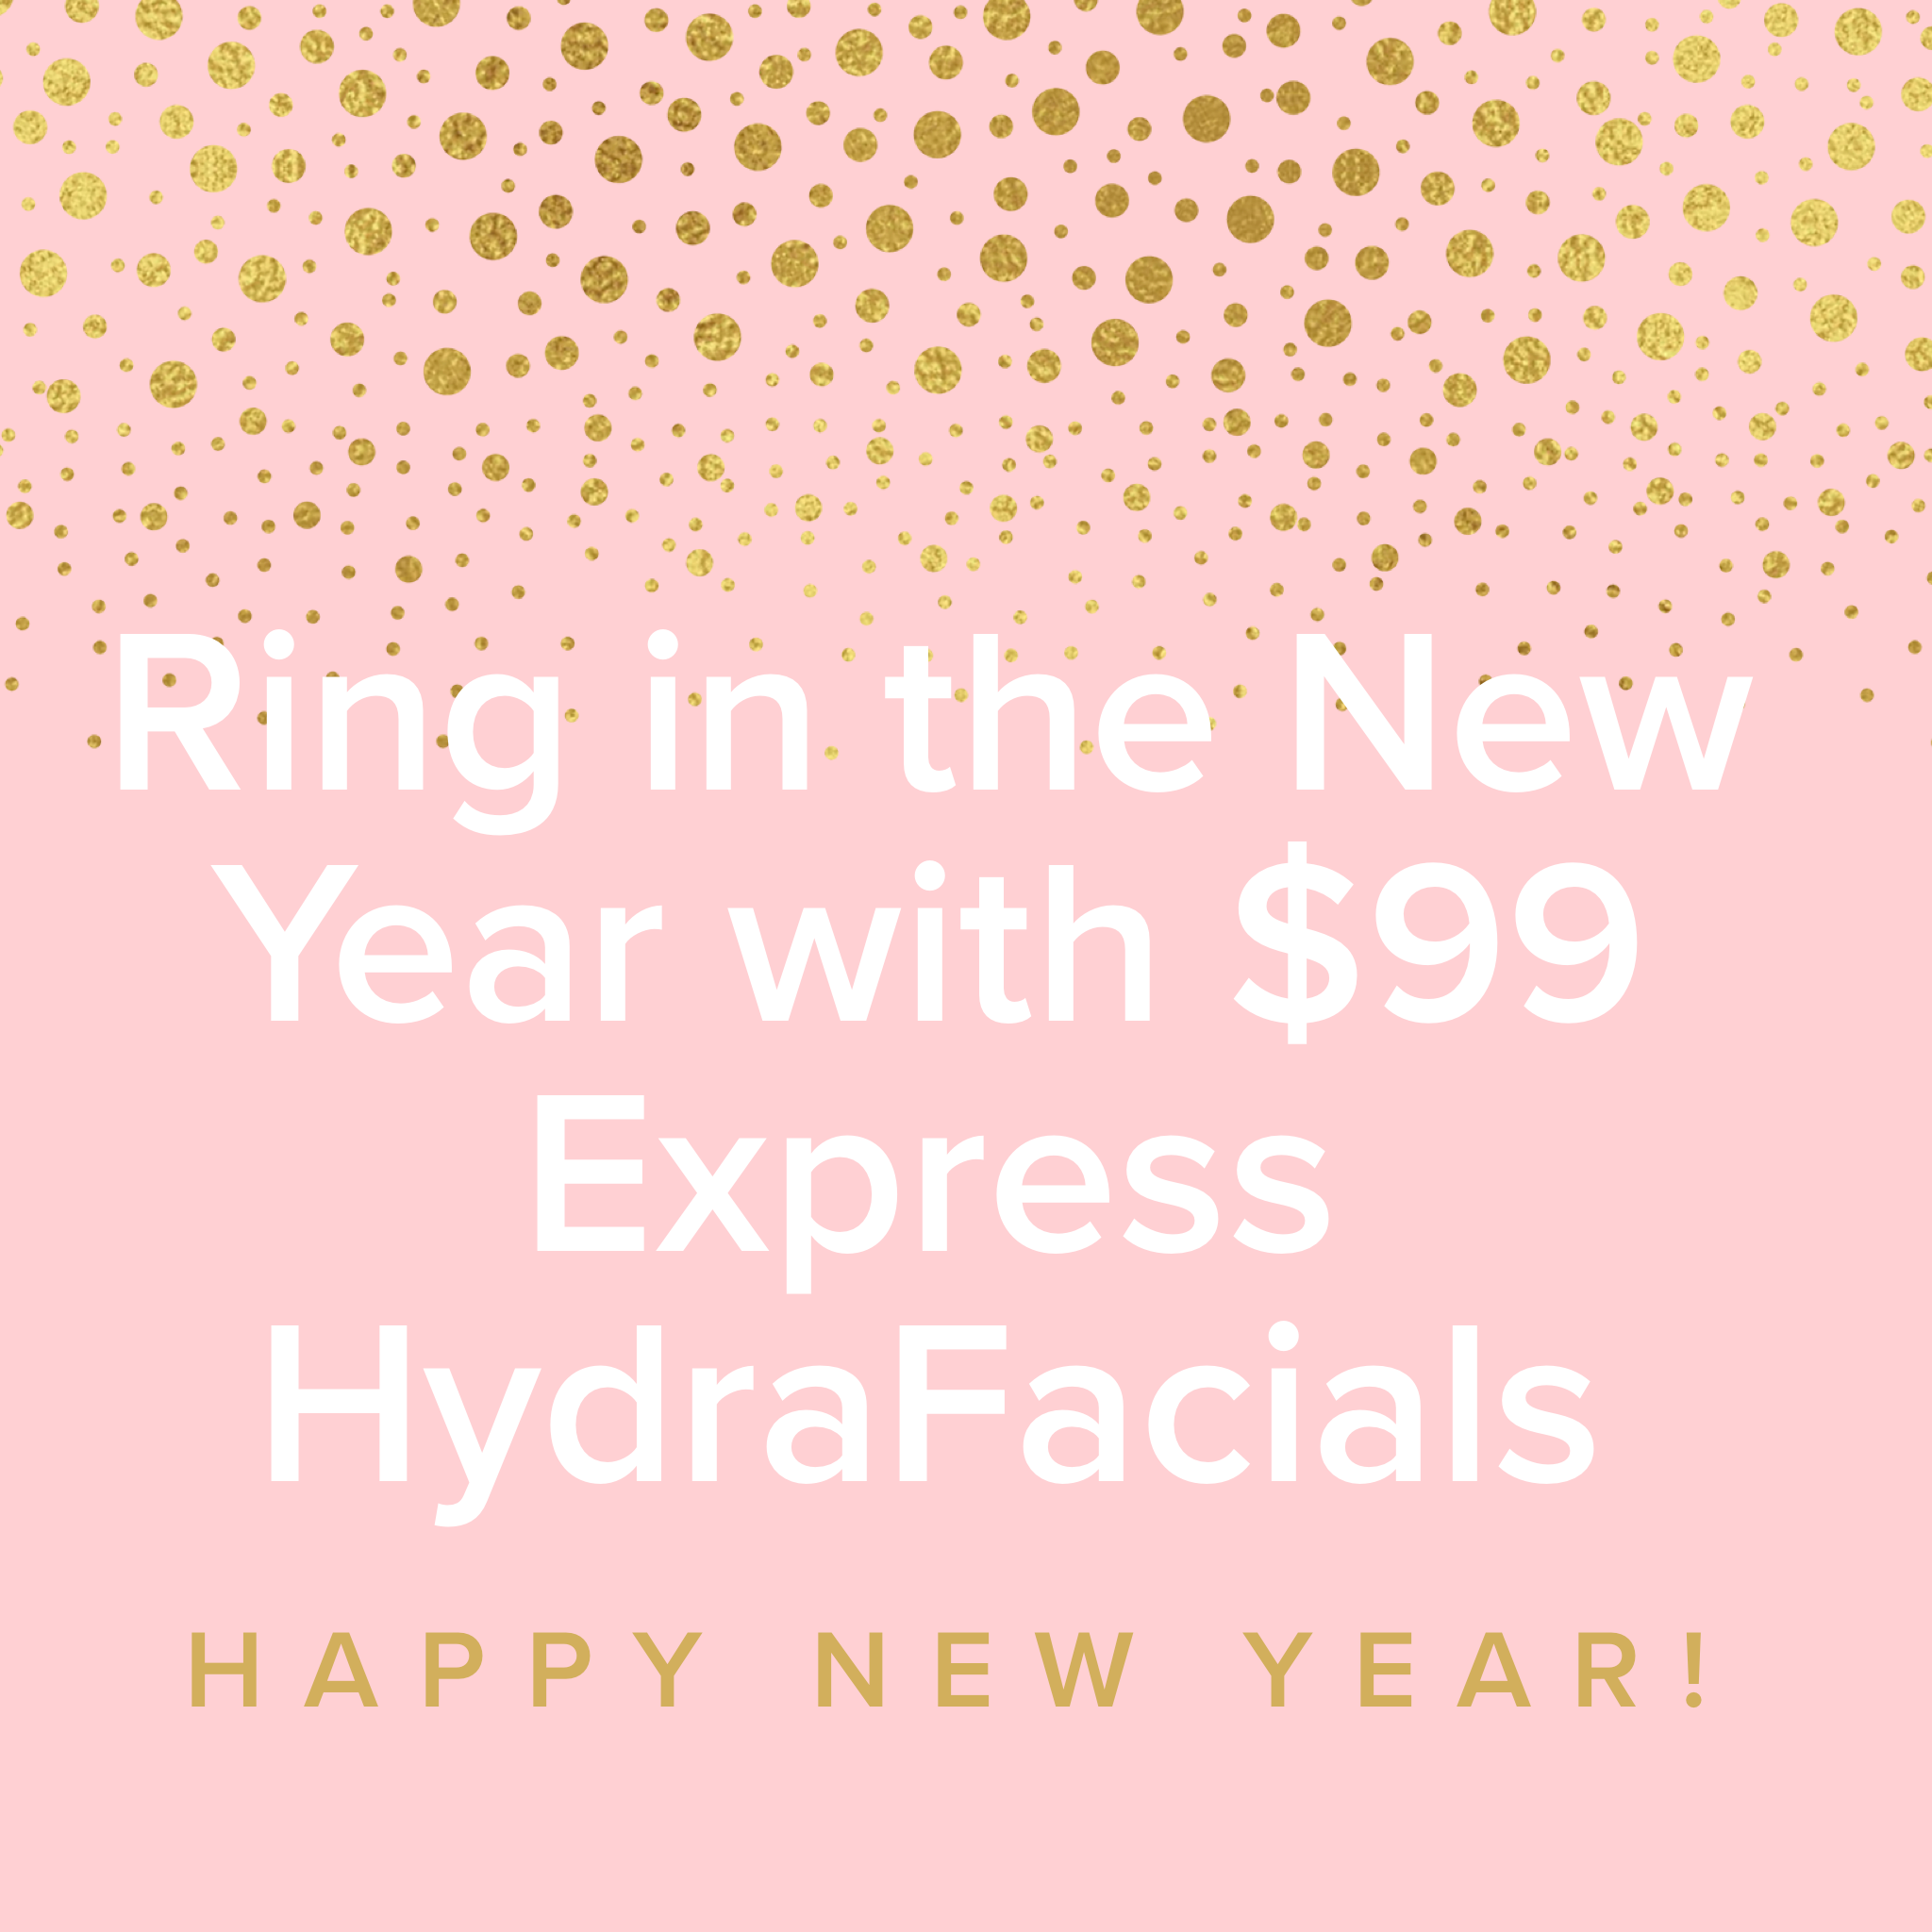 Last Day To Purchase $99 Express HydraFacial Treatment